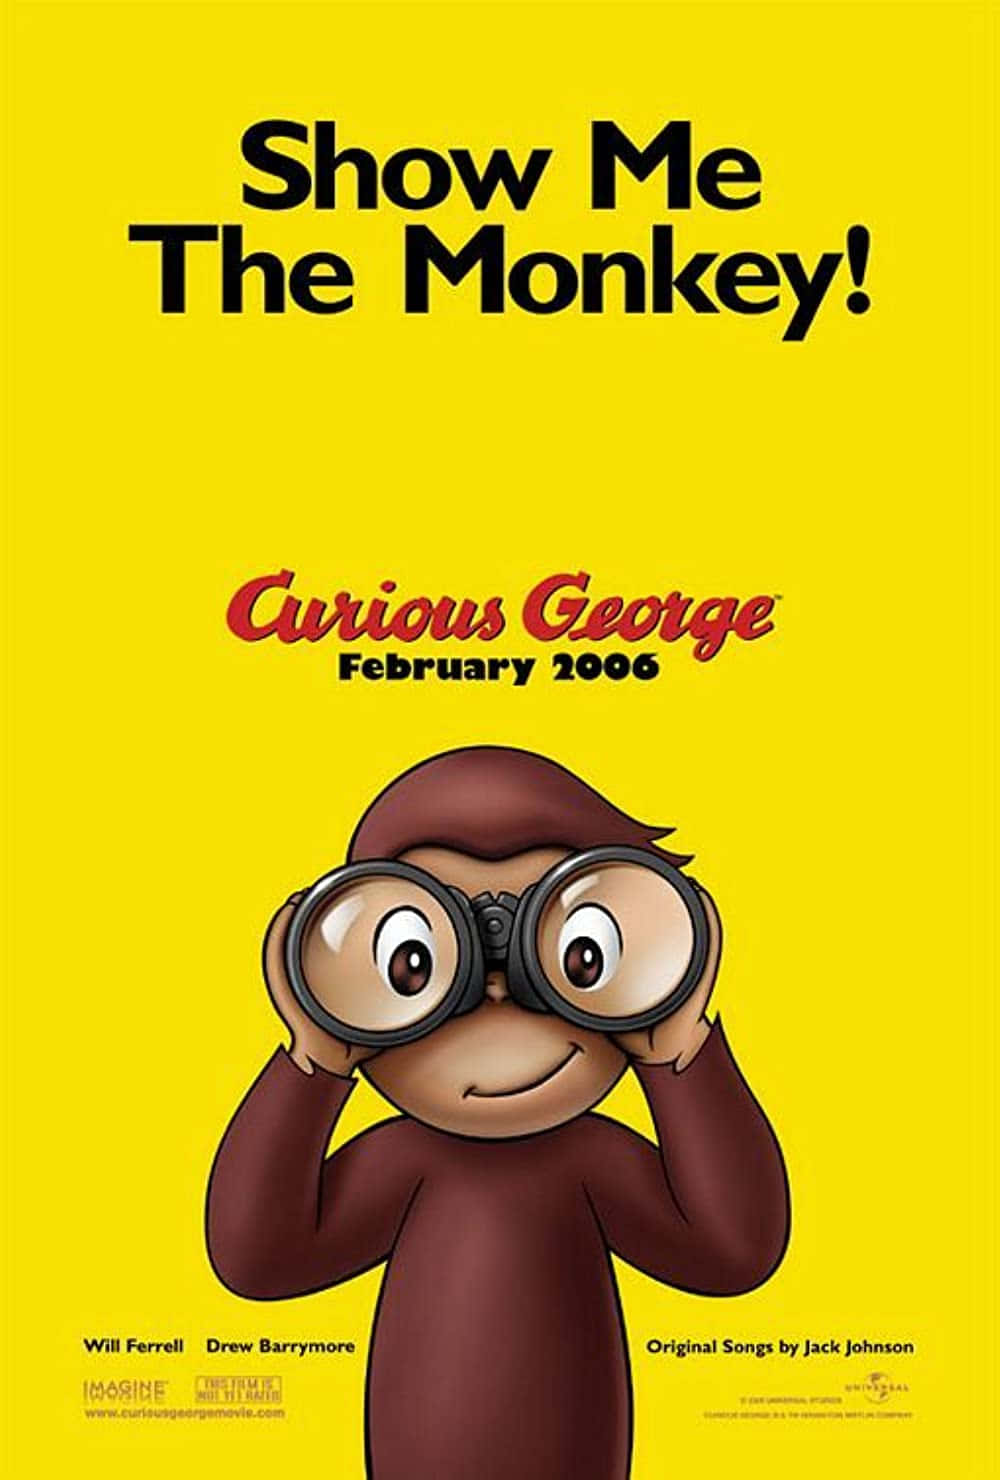 Adventures of Curious George - He's Your Little Monkey